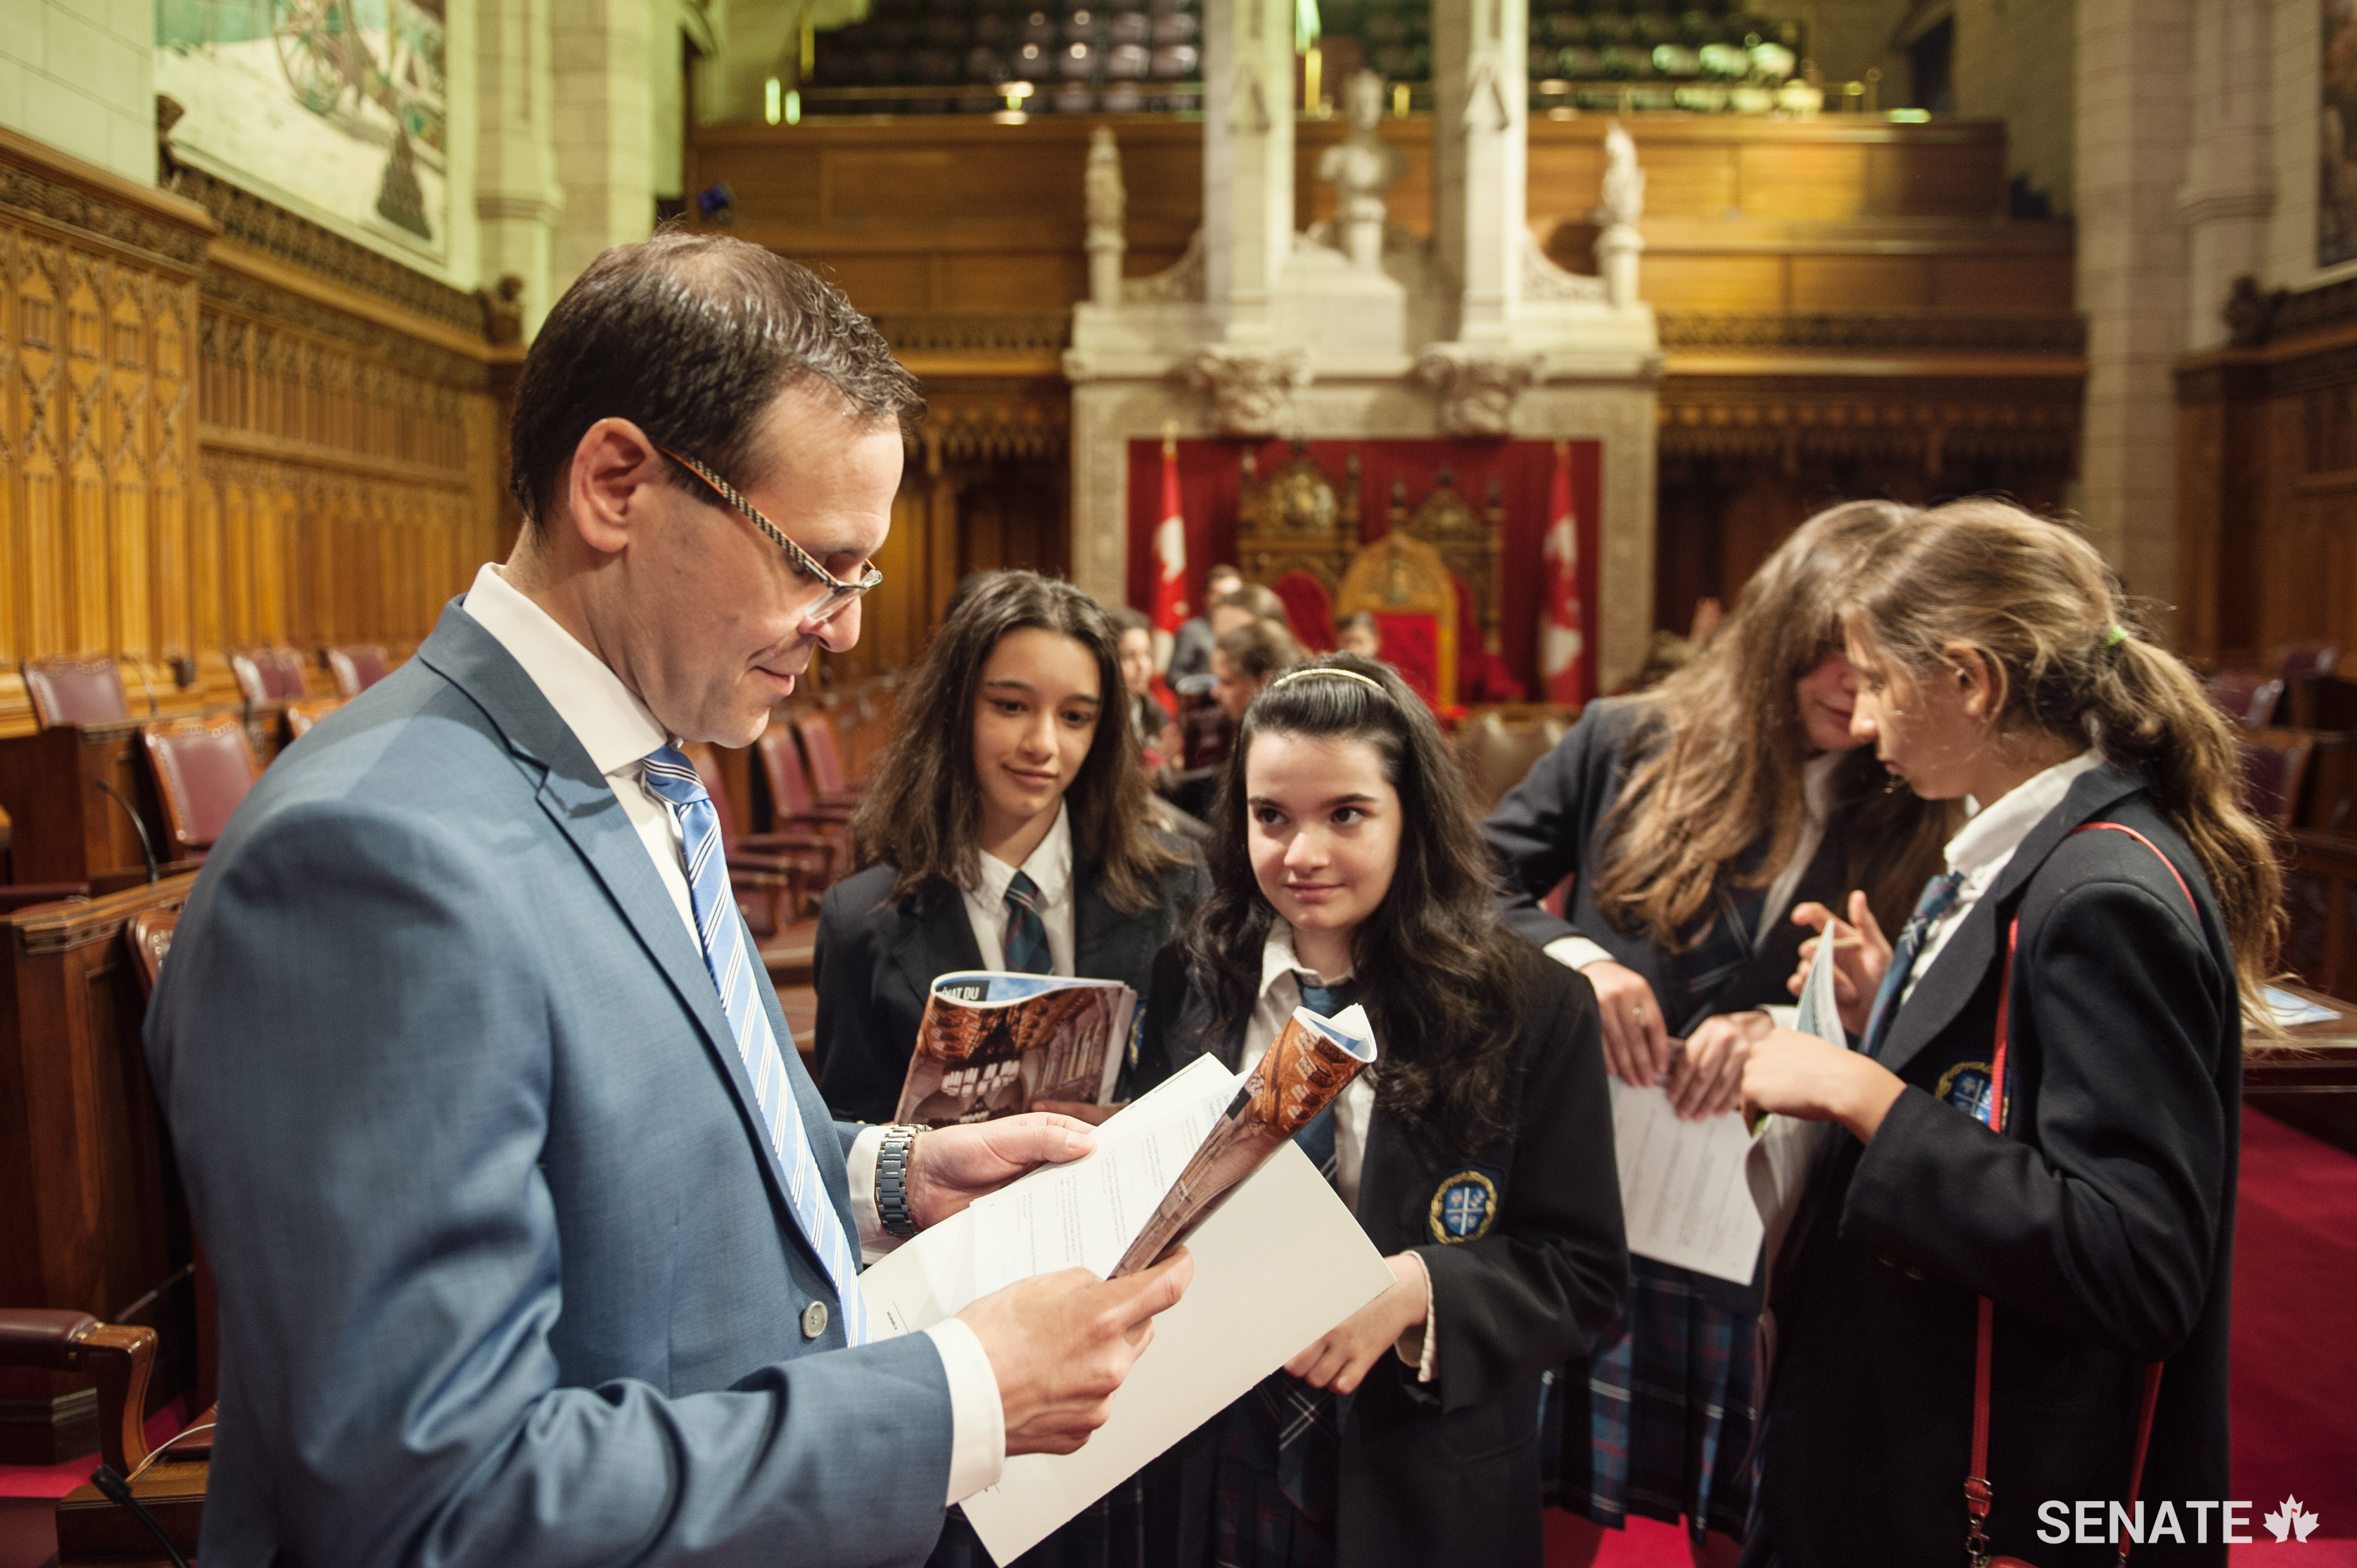 Senator Housakos helps students complete questions in a brand new Senate activity booklet.